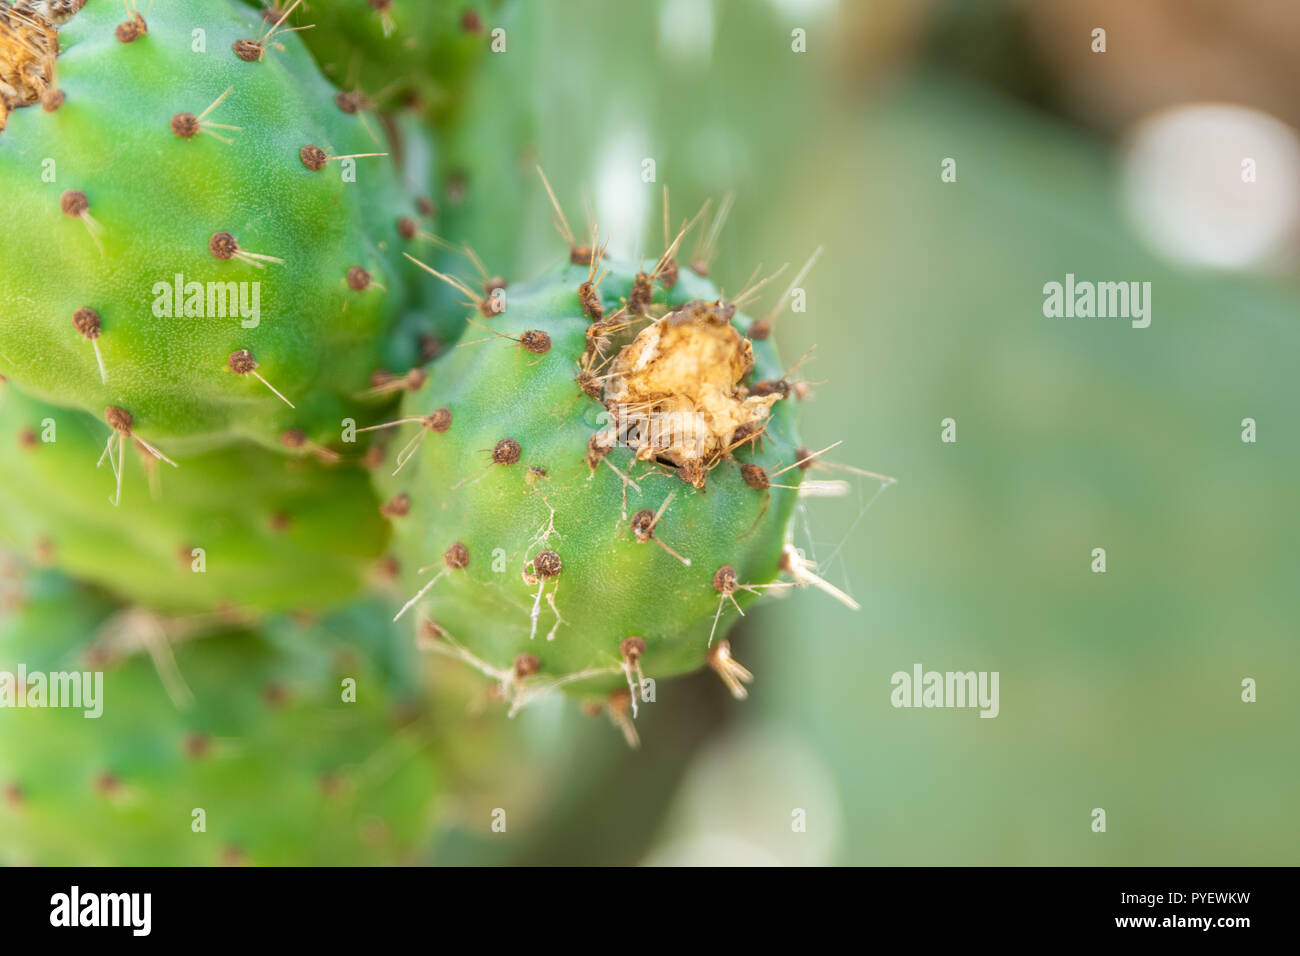 Opuntia or prickly pear in the summer season. Higo fruit. Horizontal. background out of focus Stock Photo